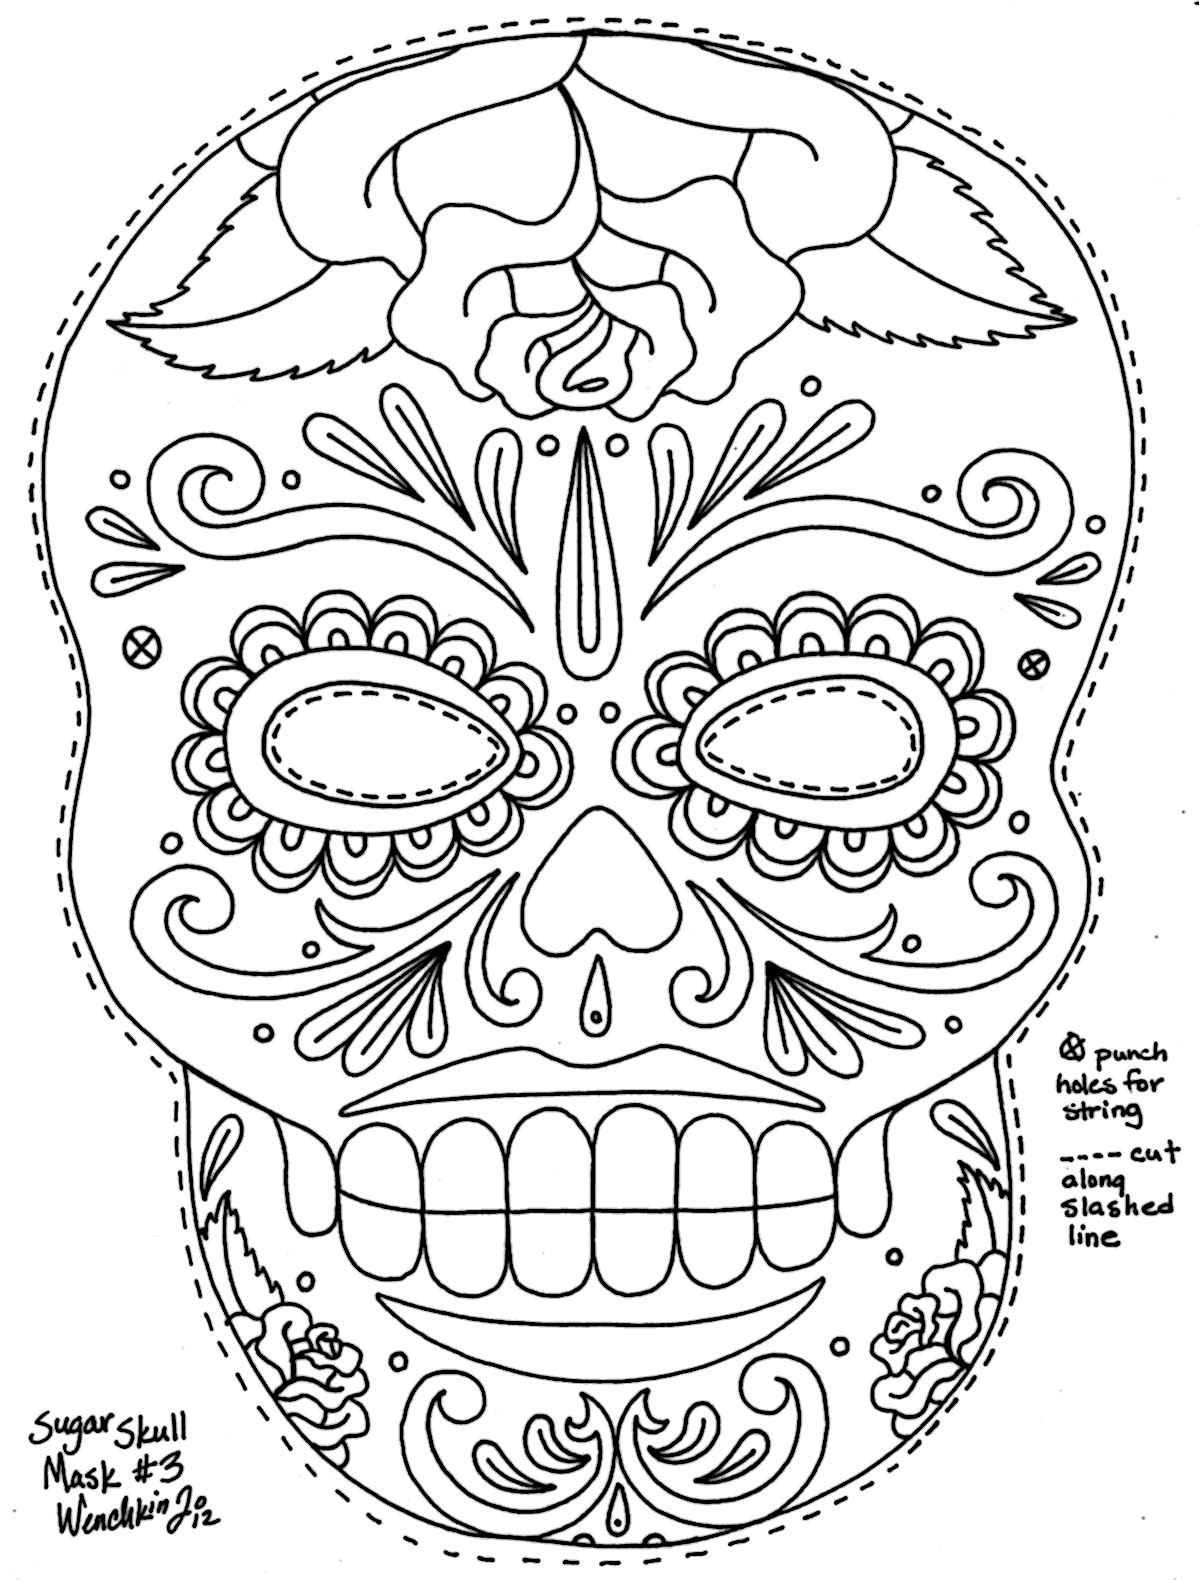 Adult Coloring Pages Skulls Roses Coloring Pages